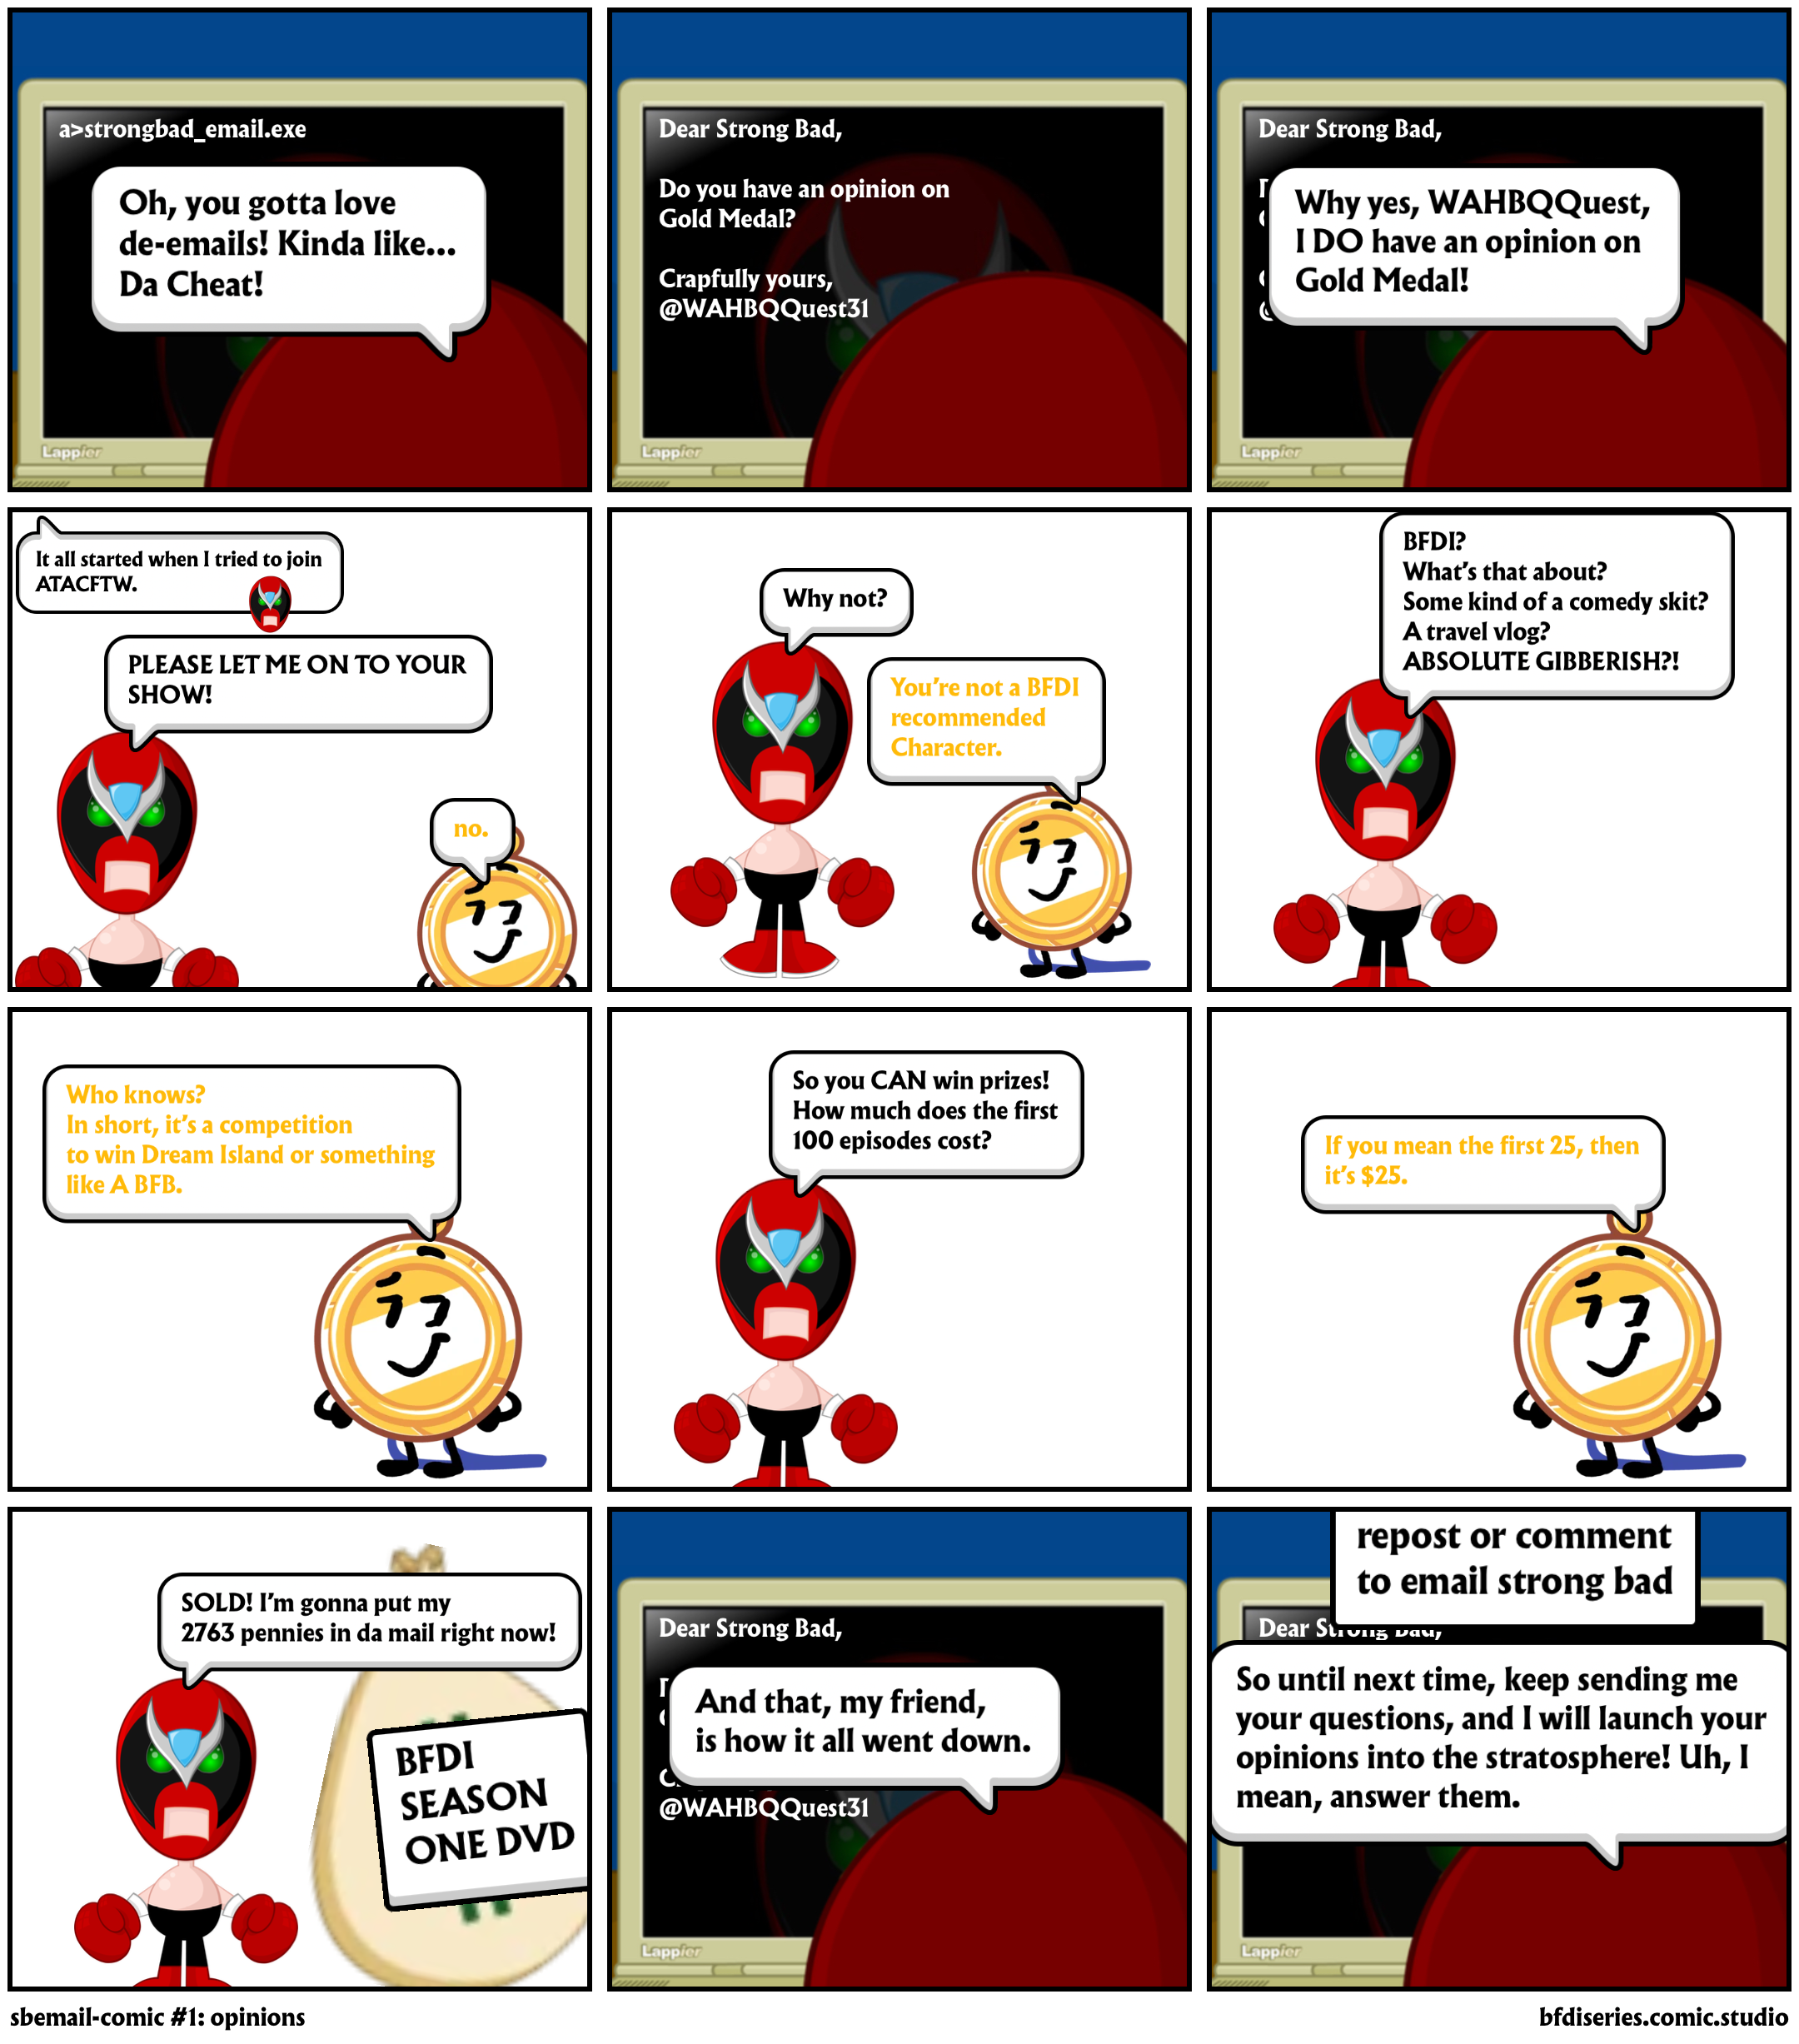 sbemail-comic #1: opinions